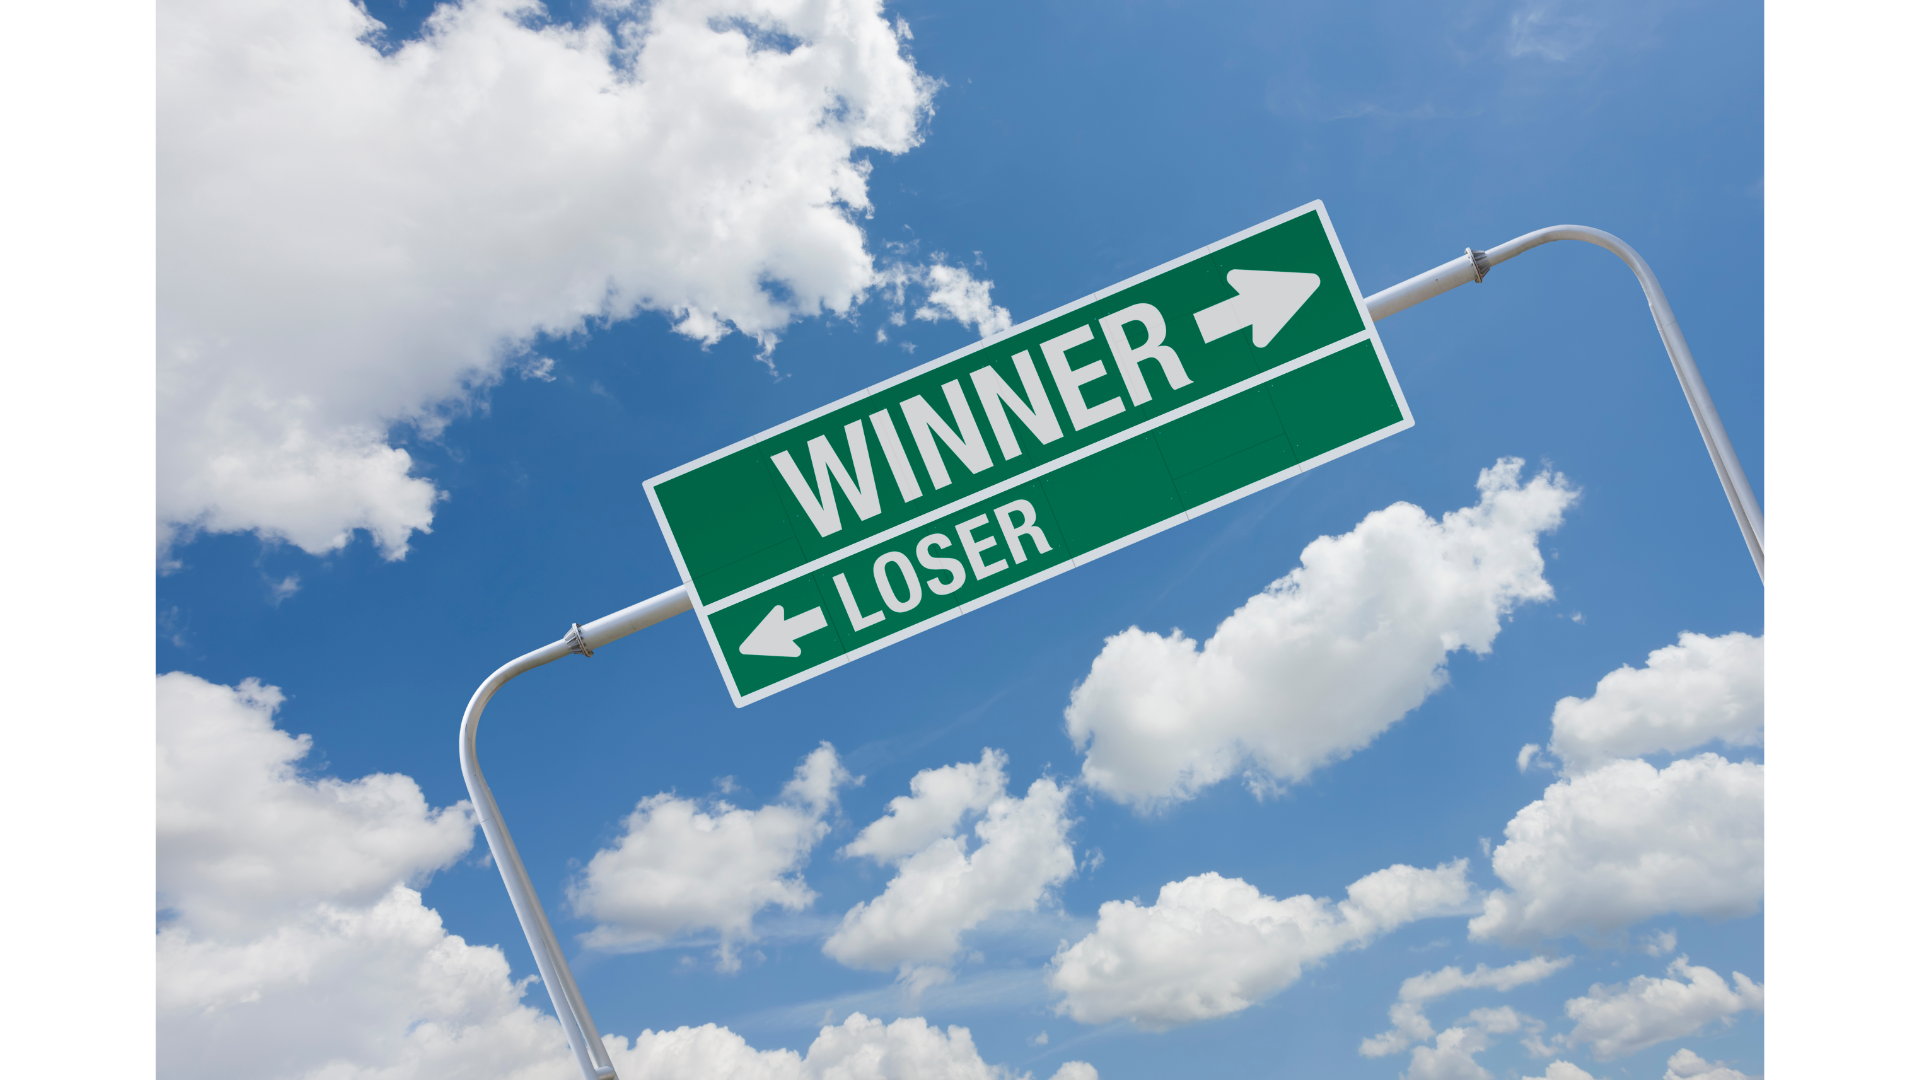 green highway sign with exit for winners and losers. winner sign points upward, loser sign points low